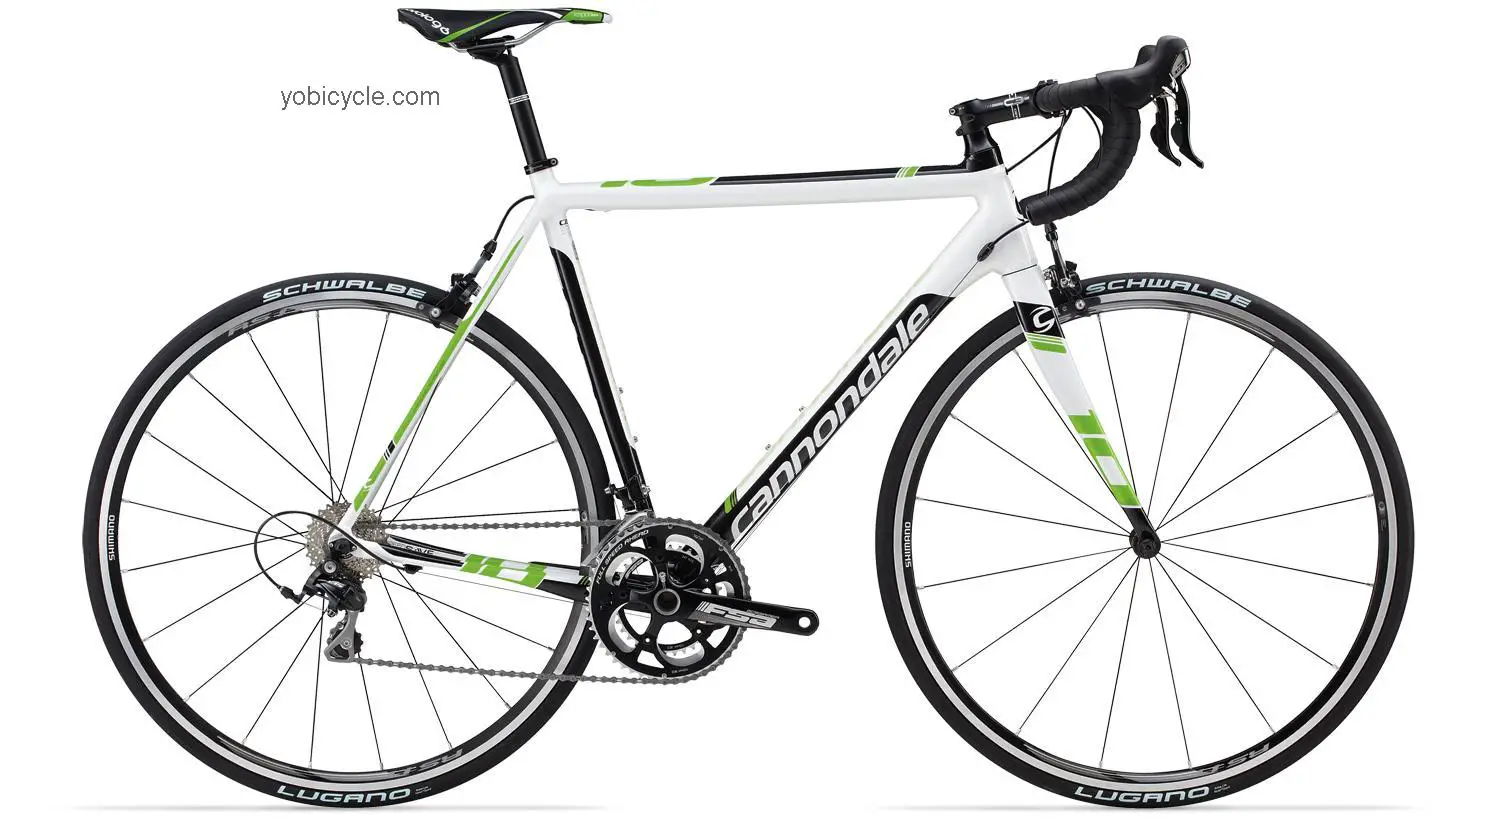 Cannondale CAAD10 5 105 Compact 2014 comparison online with competitors